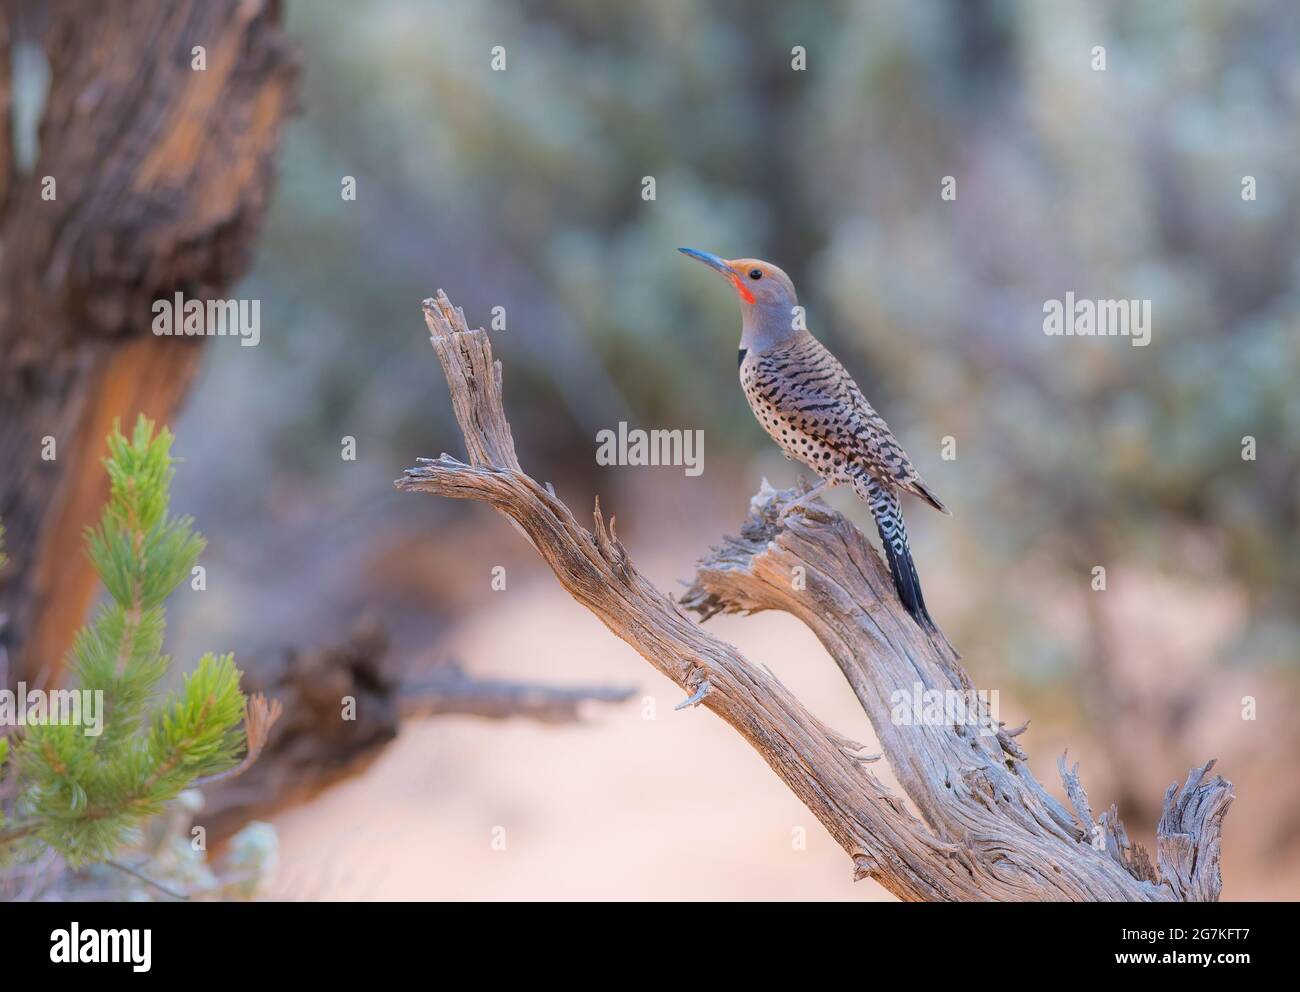 Northern Flicker perched upright on a horizontal branch Stock Photo